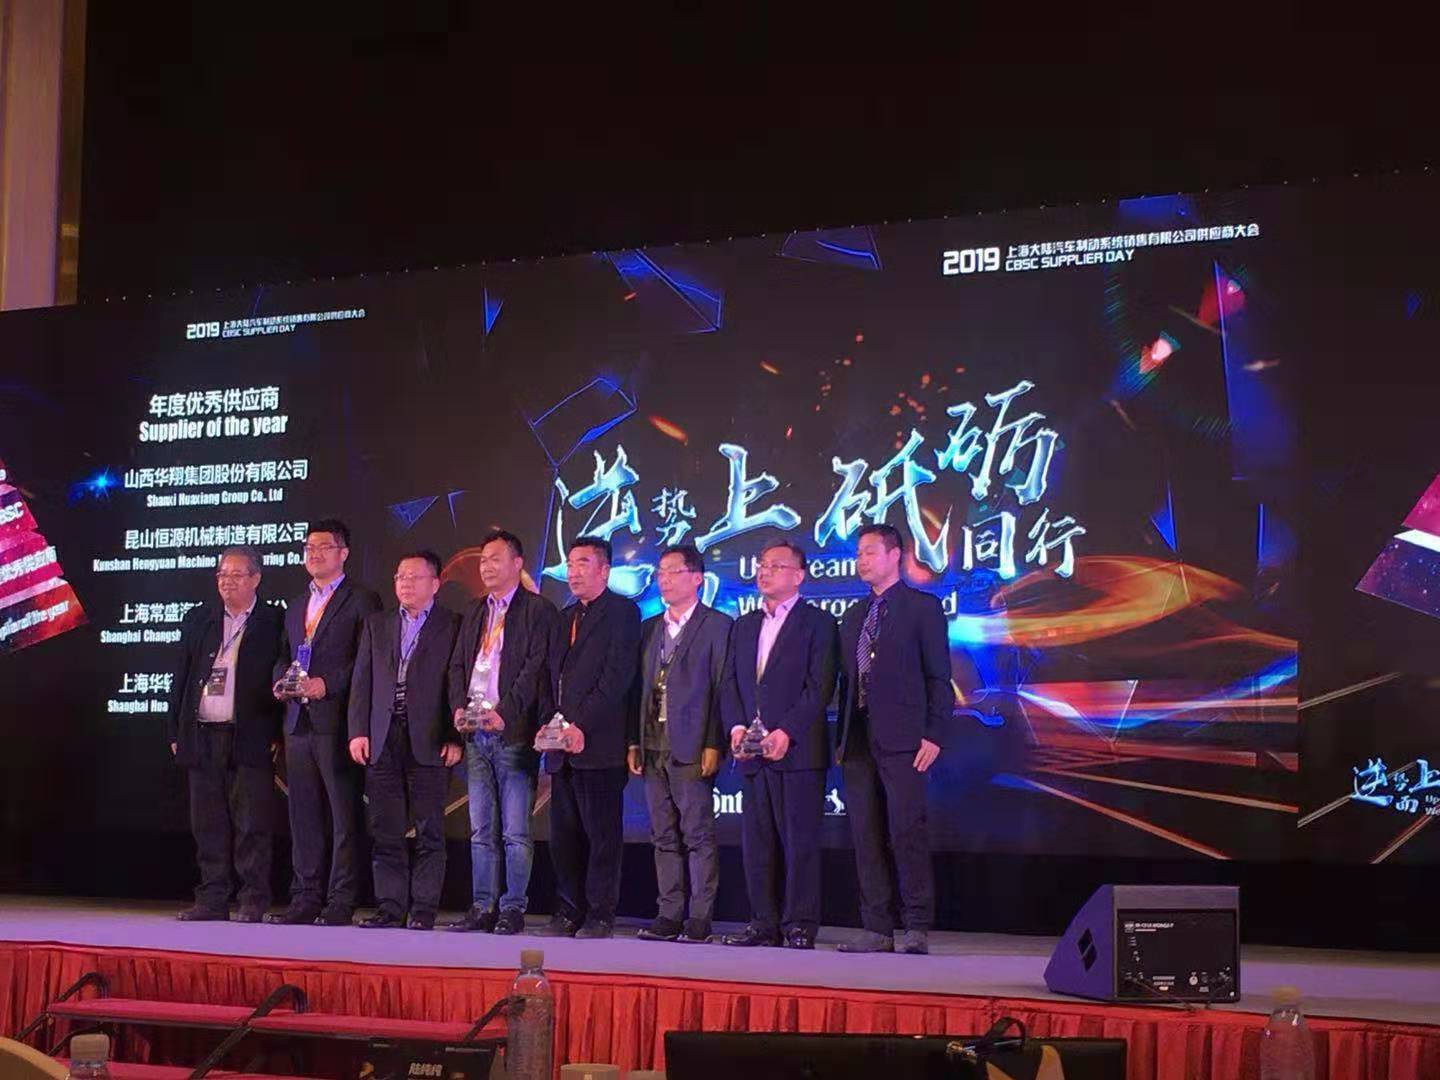 Congratulations to our company for winning the excellent supplier award in mainland China for three 